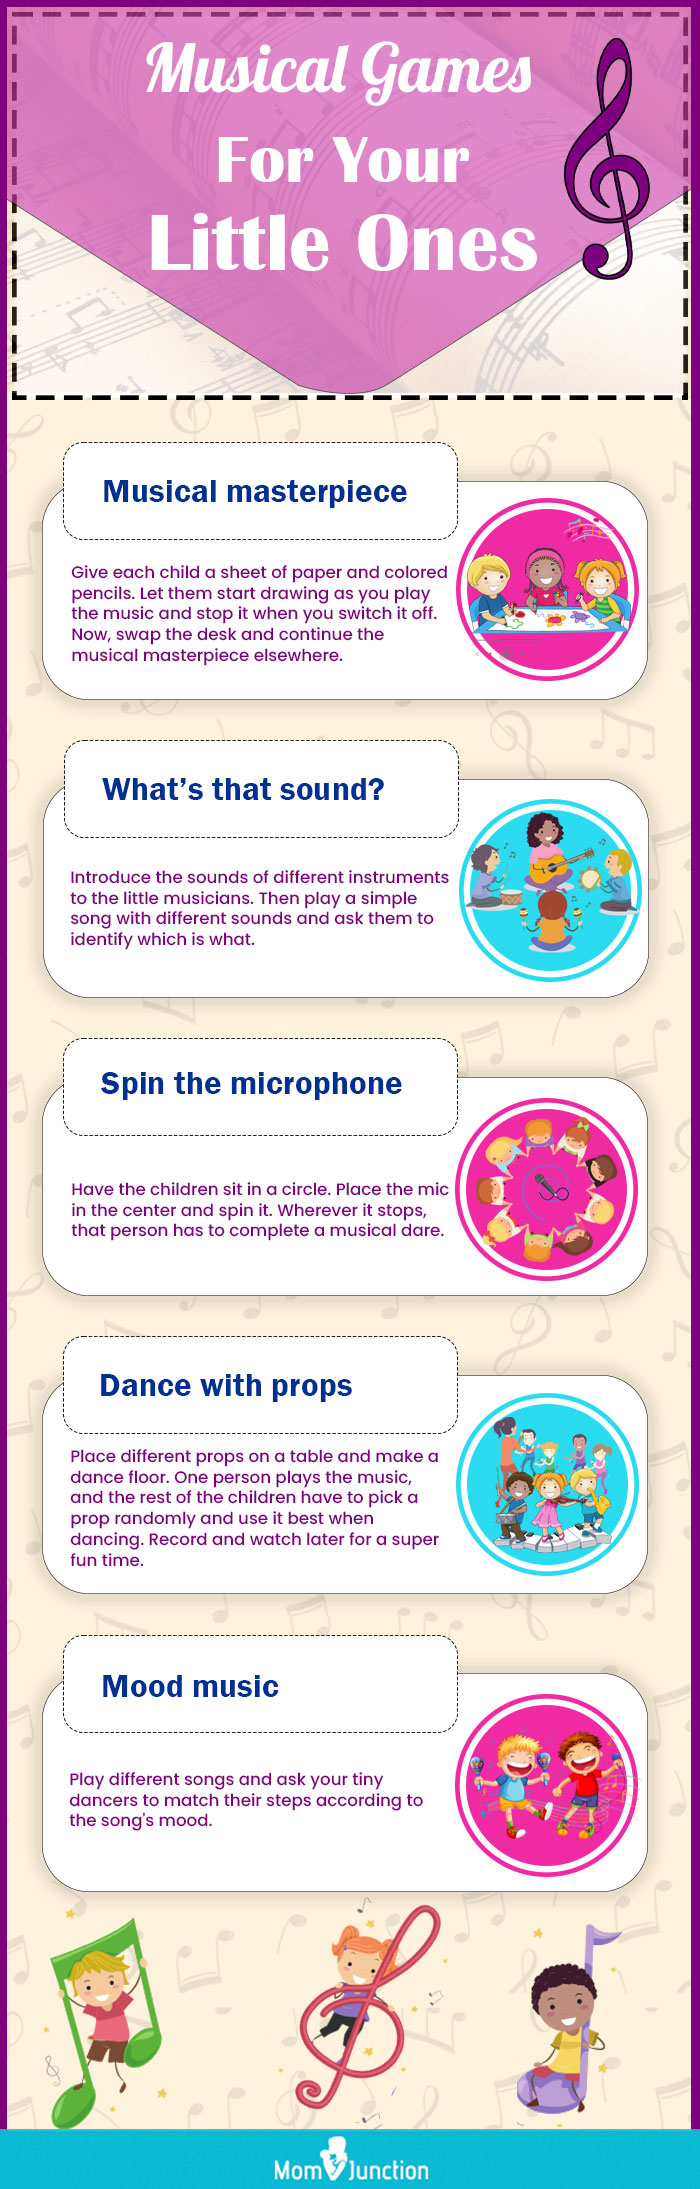 musical games for babies [infographic]